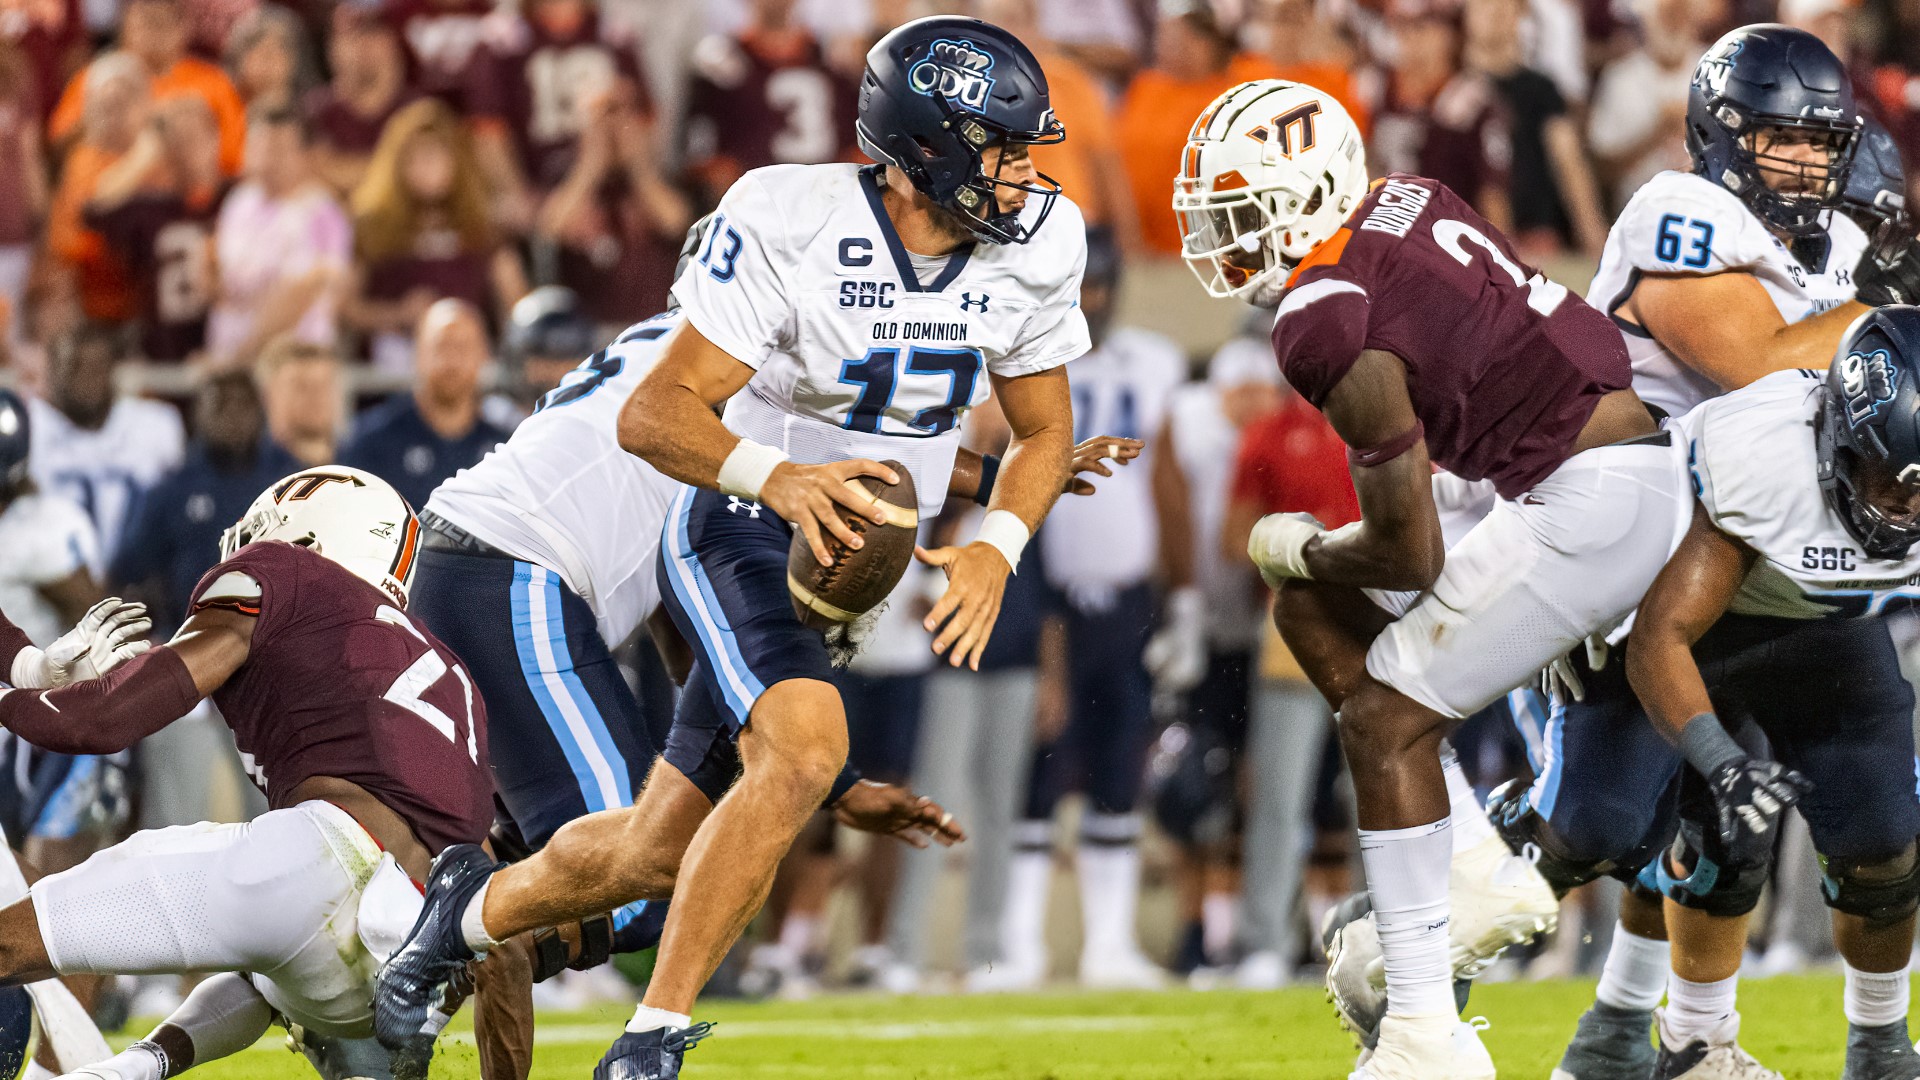 Monarchs quarterback Grant Wilson tossed two touchdowns in ODU's loss to the Hokies Saturday night.